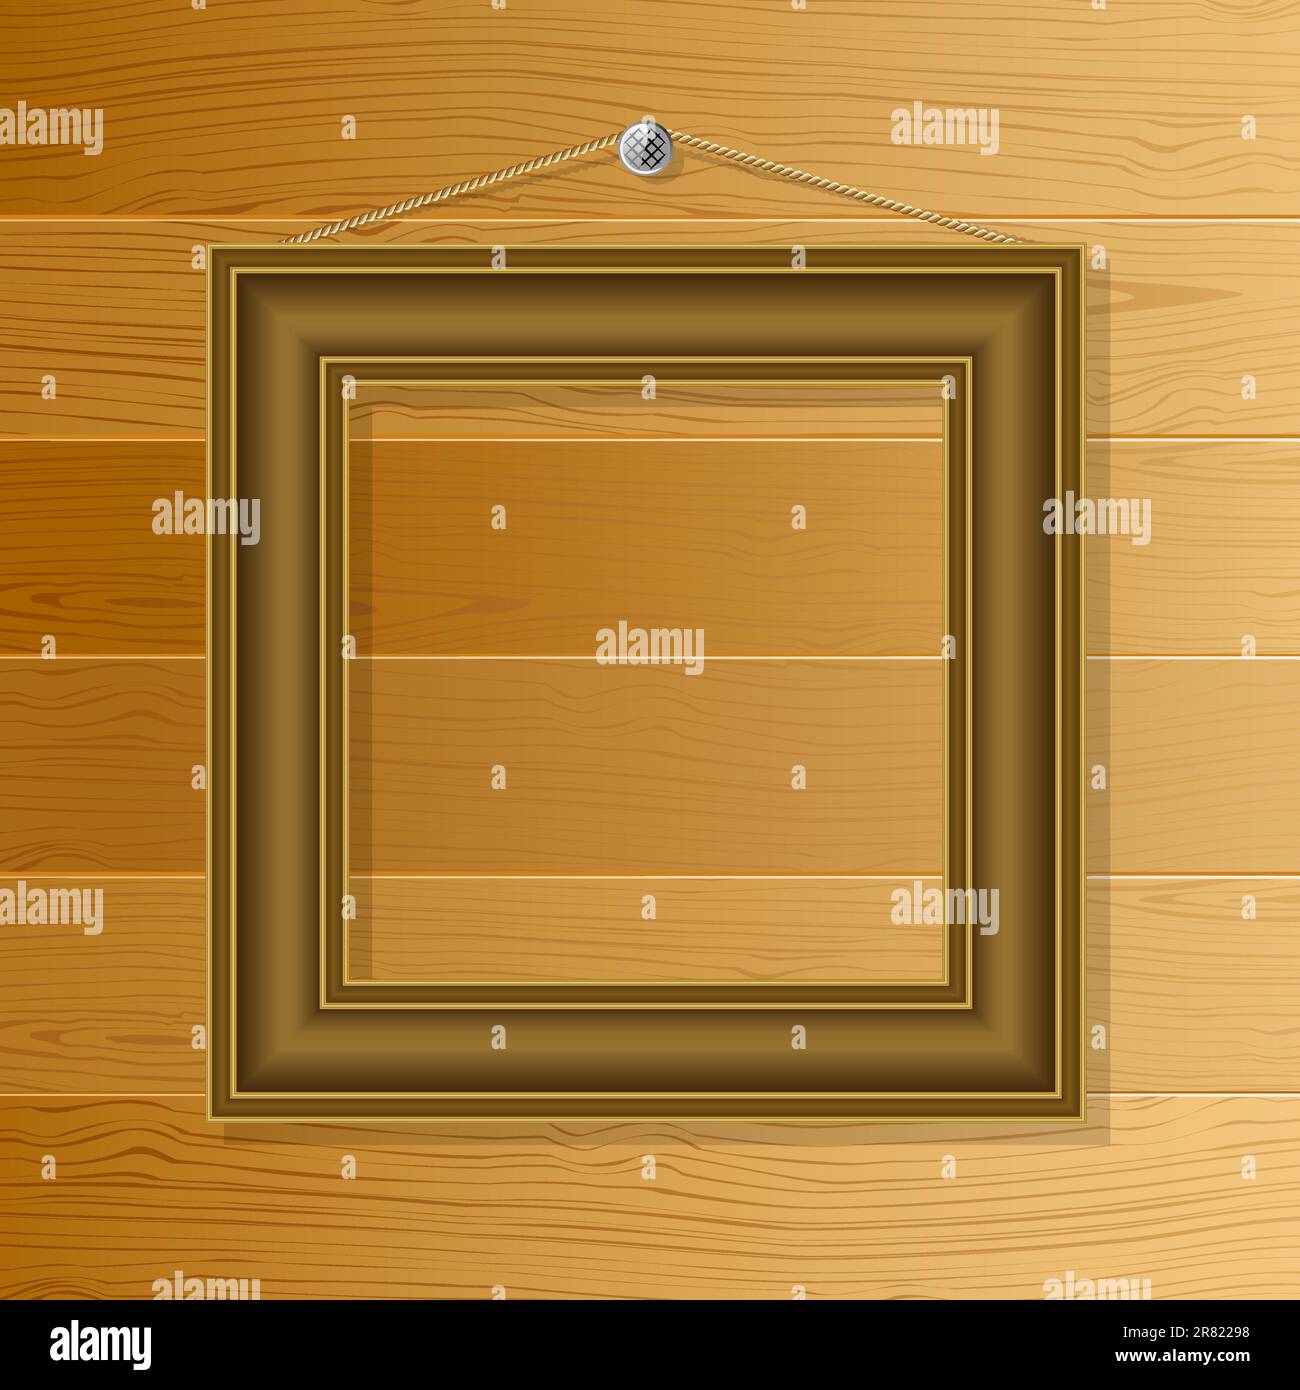 Brown frame on the wall of the boards Stock Vector